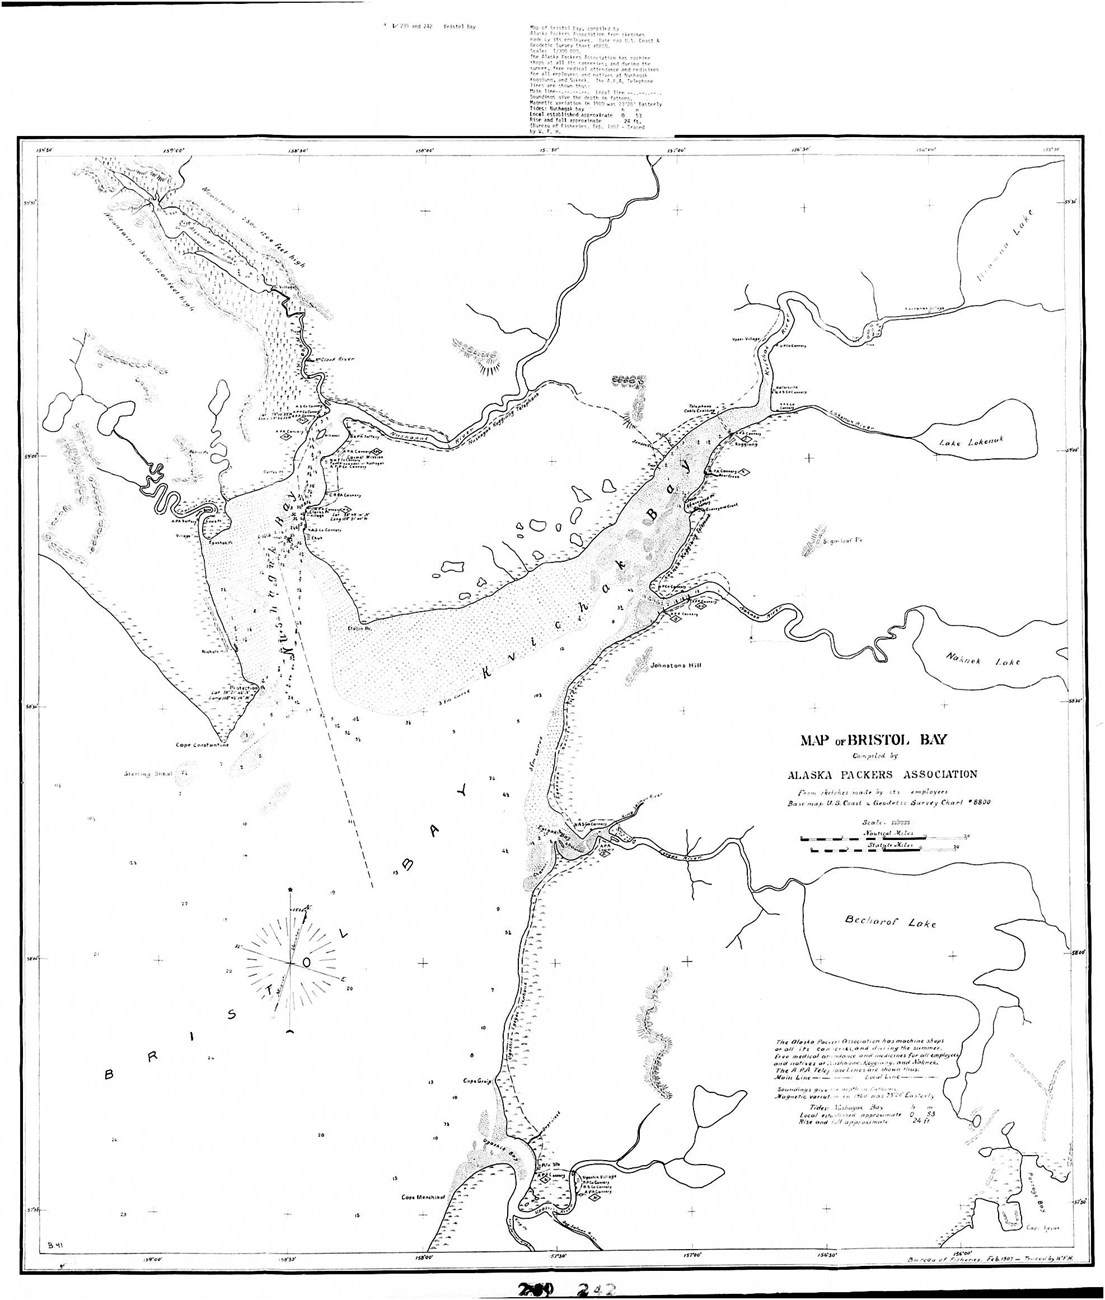 Sketched map of Bristol Bay includes shoreline and waterways, cannery locations, nautical features